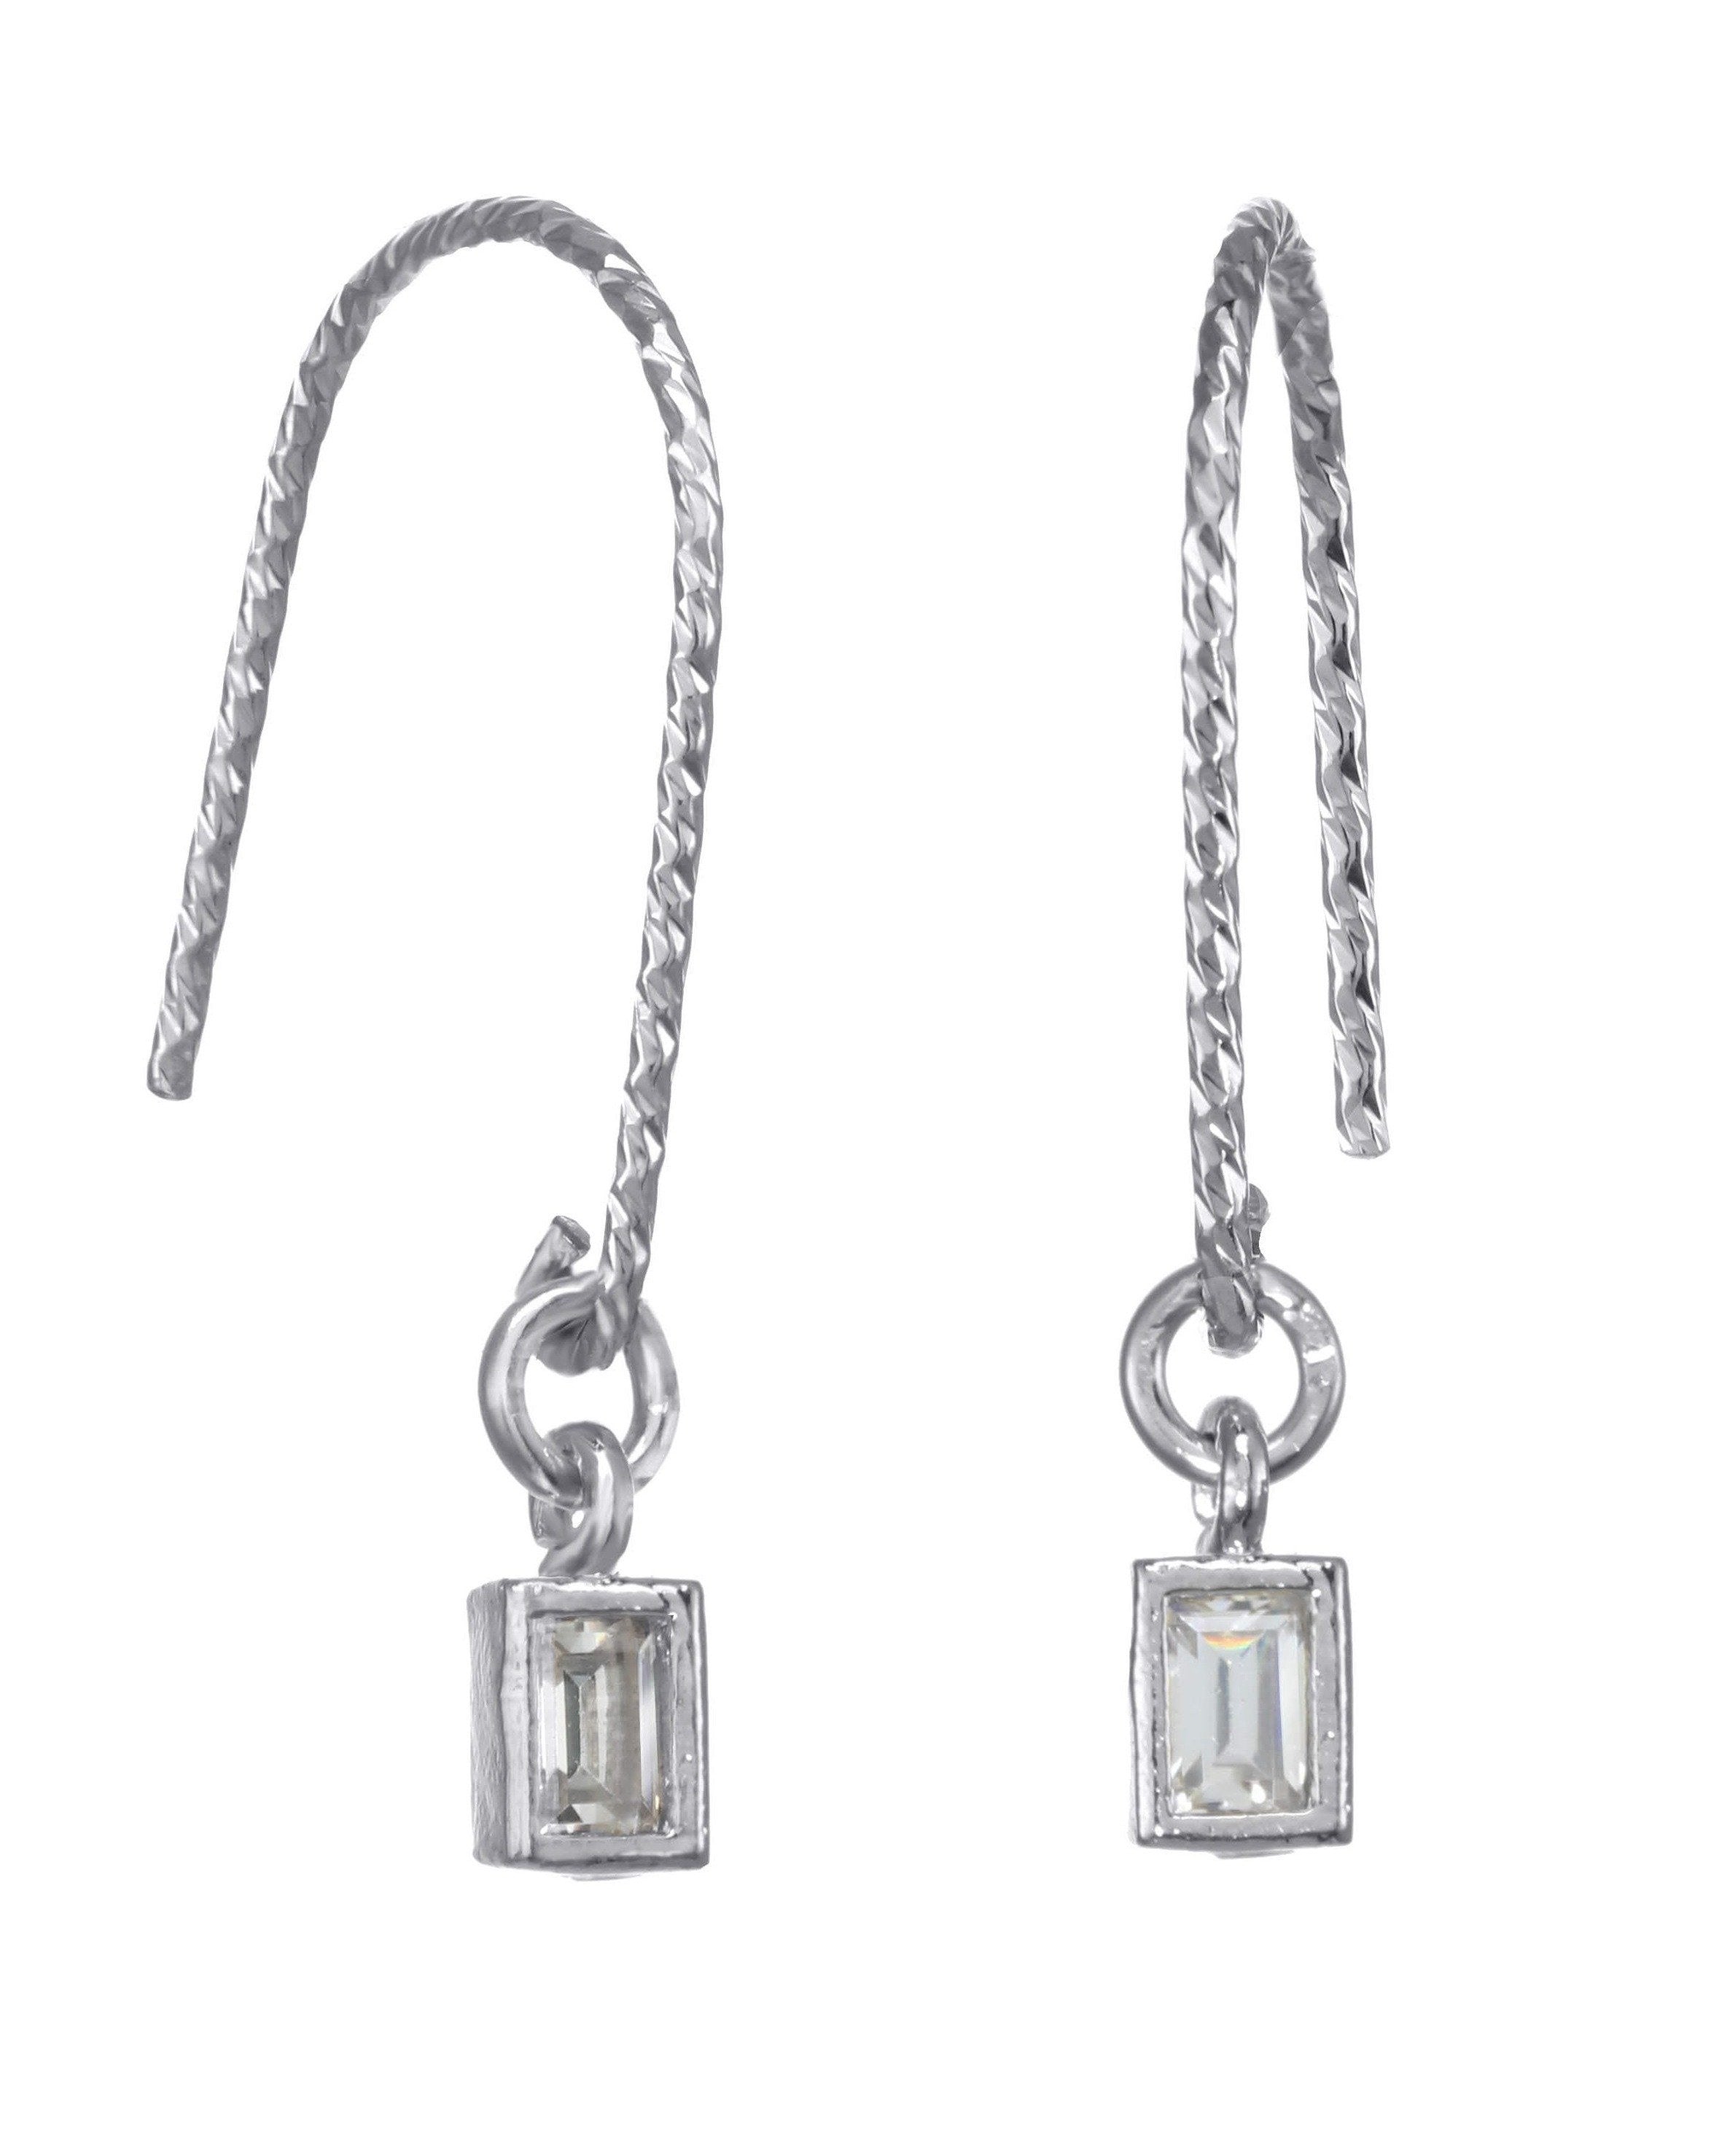 You Cadre Earrings by KOZAKH. Diamond textured hook earrings, crafted in Sterling Silver, featuring a CUbic Zirconia charm.